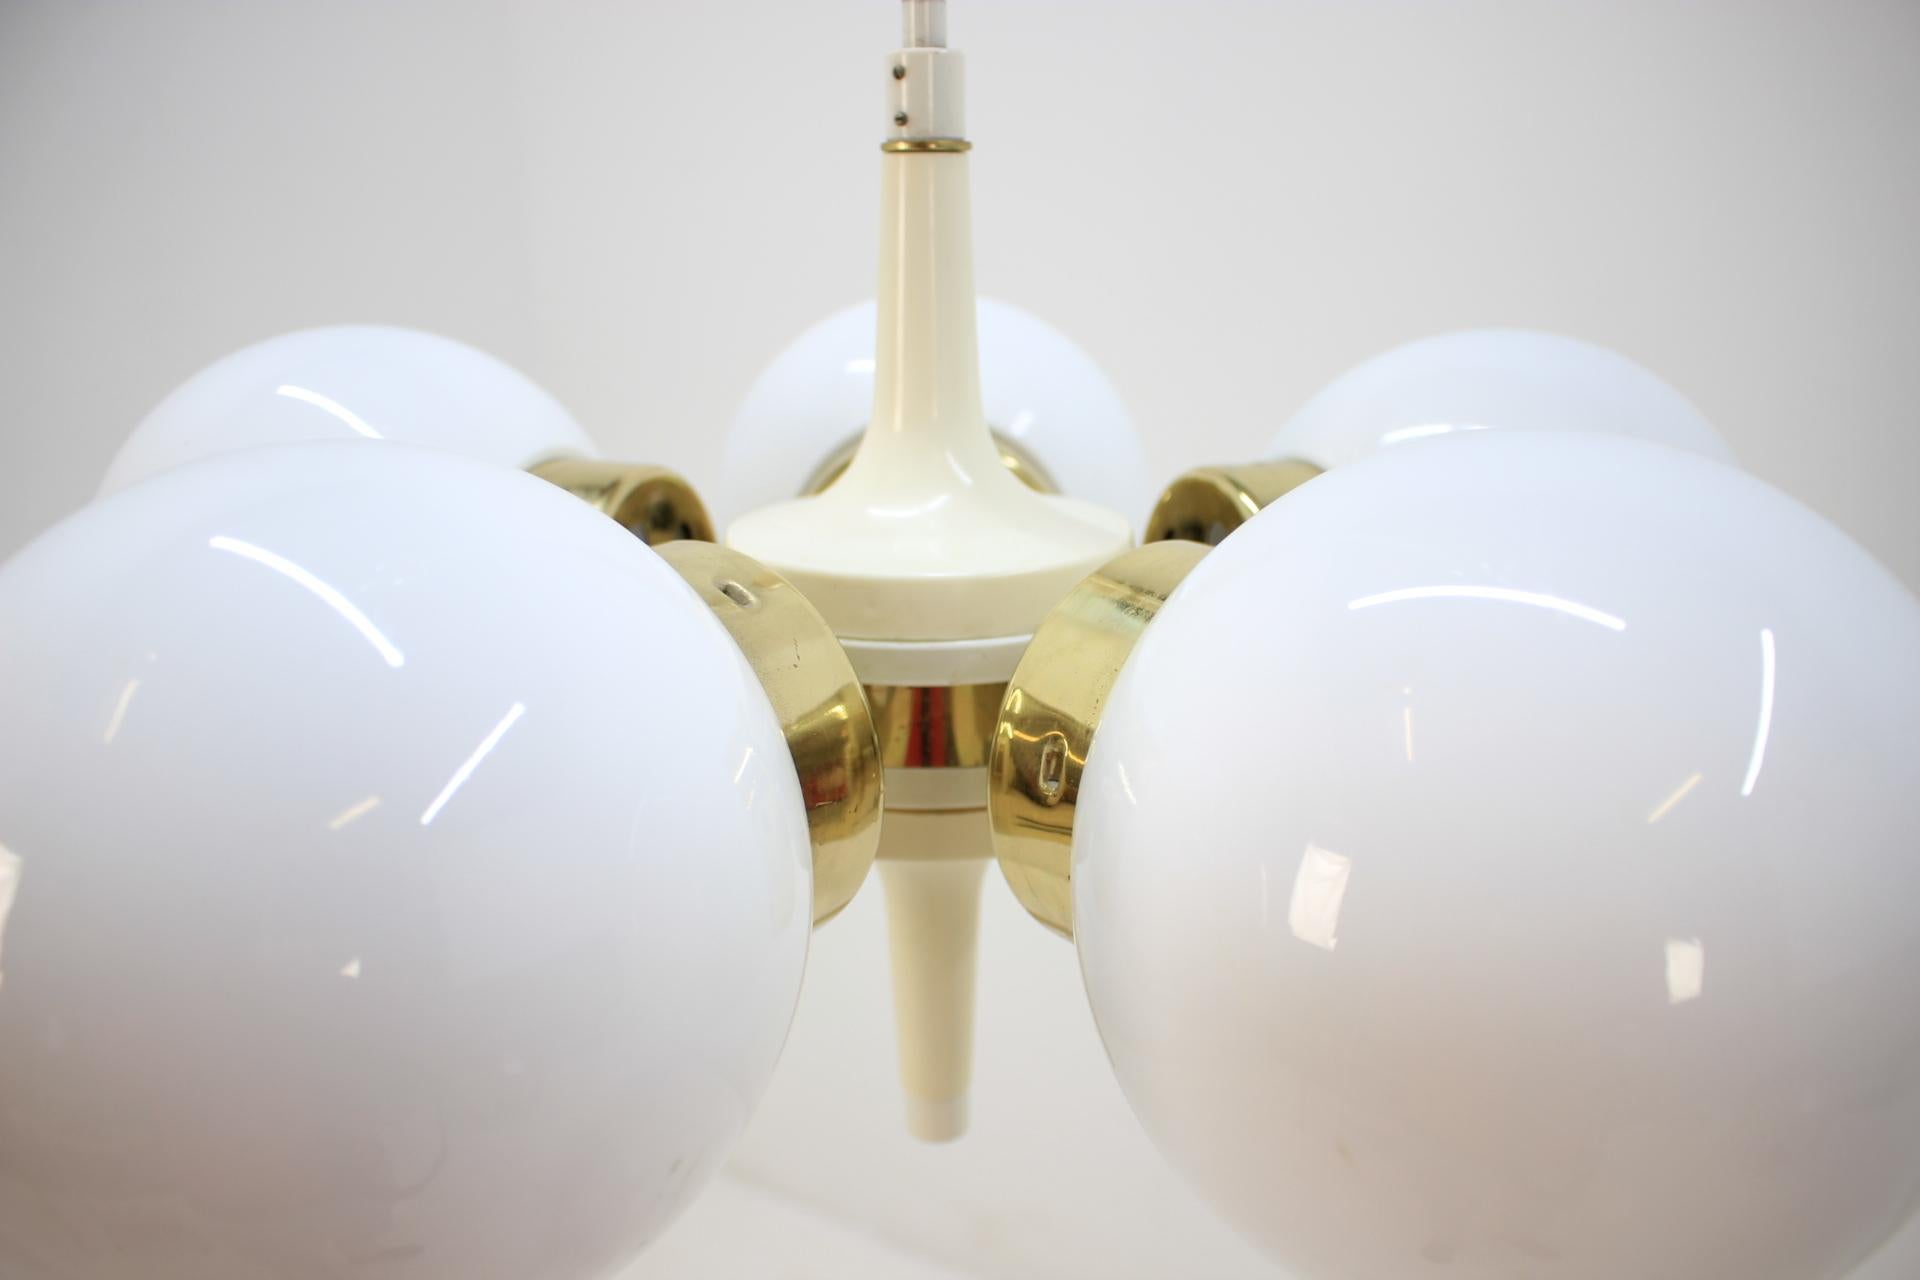 - Chandelier or pendant
- Space Age style
- Very nice style of lighting.